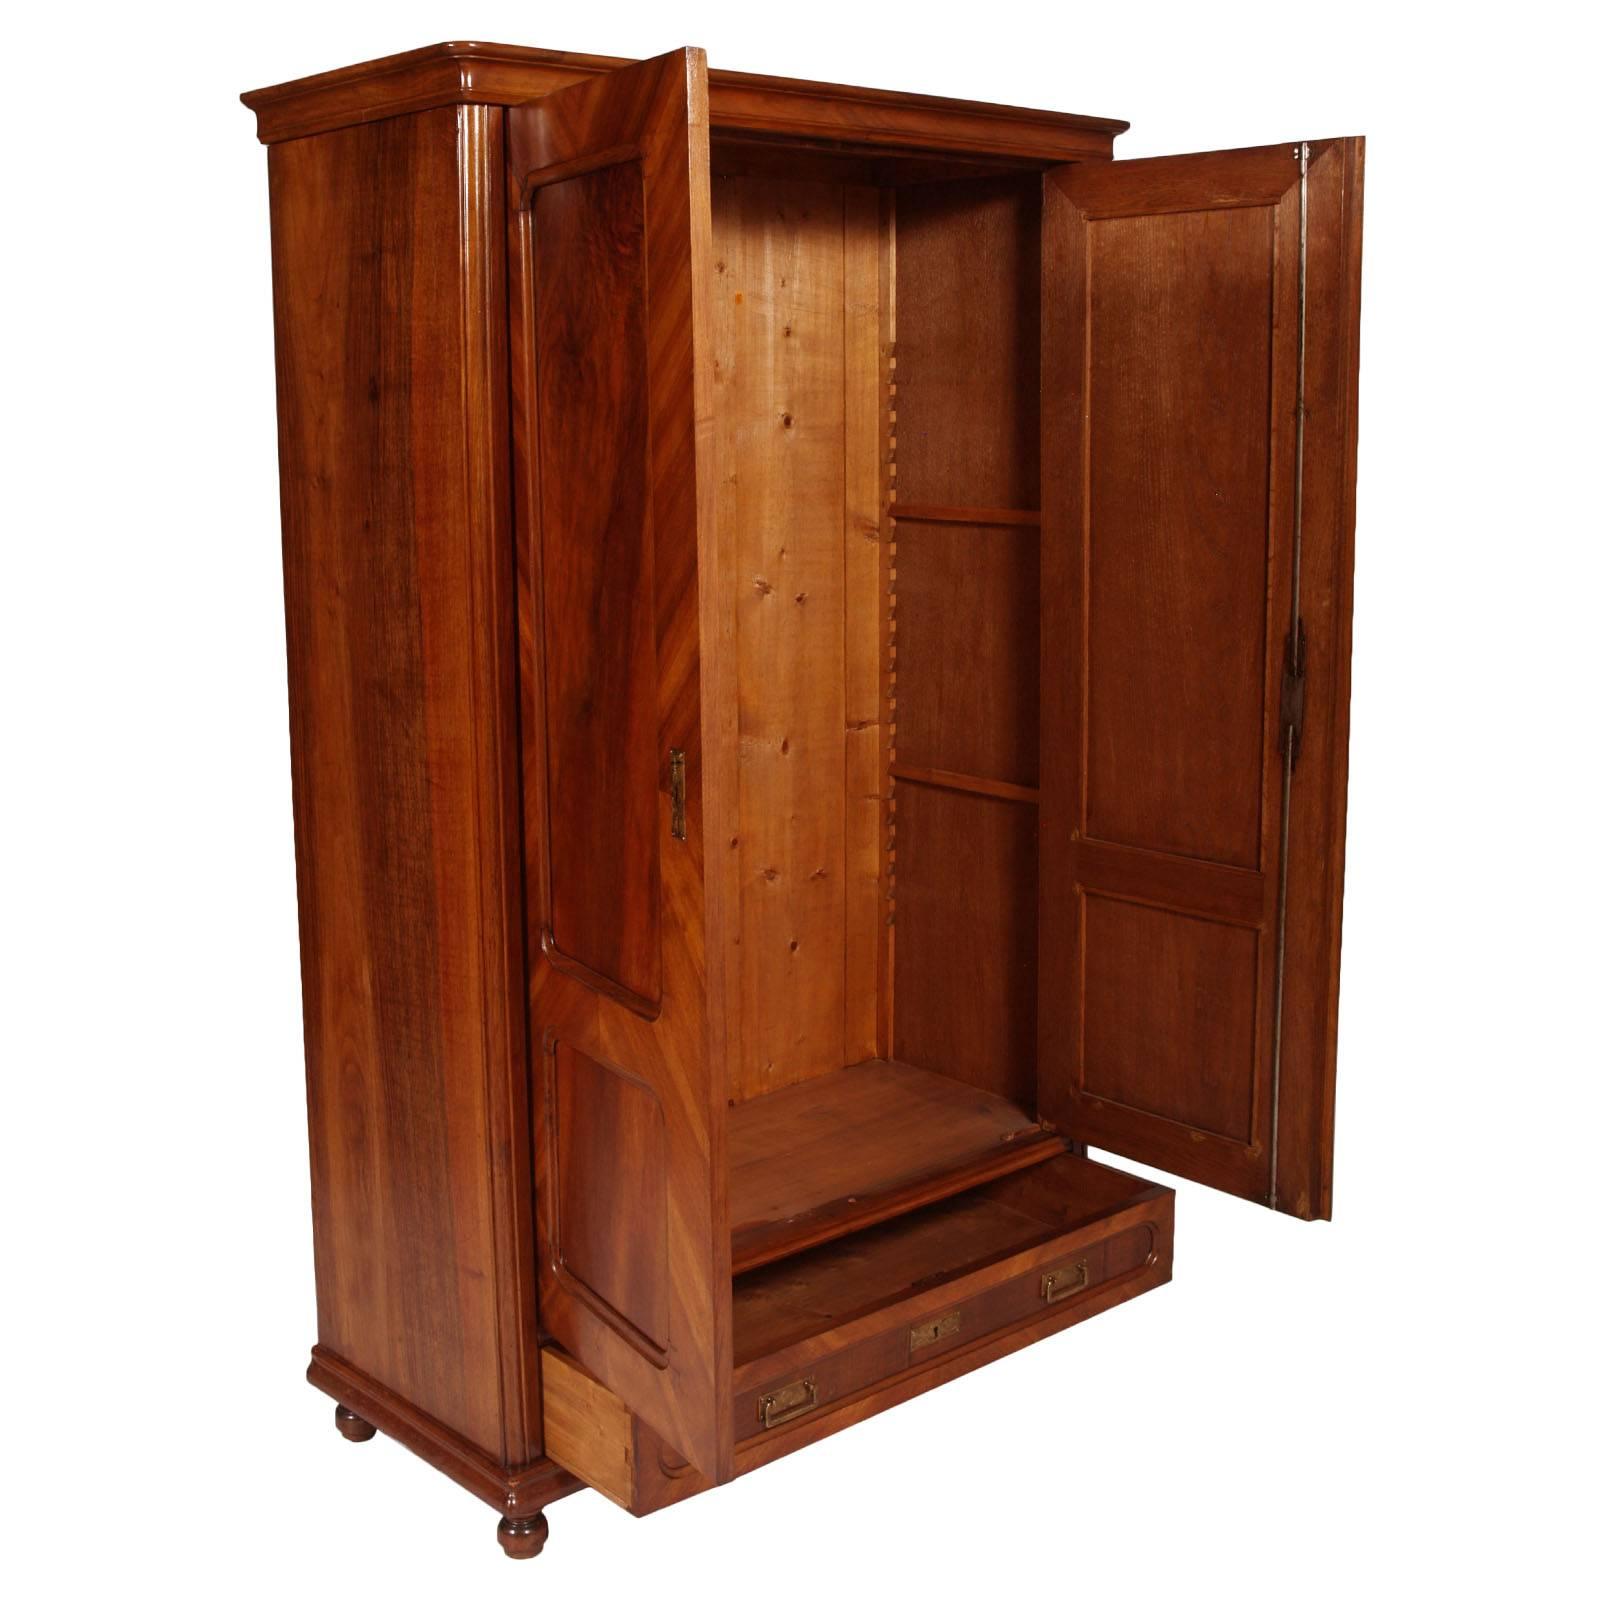 Italy Mid-19th century elegant Louis Philippe armoire or bookcase cabinet, in blond walnut and veneered walnut , restored and finished to wax

Measures cm: H 190, W 125, D 54.